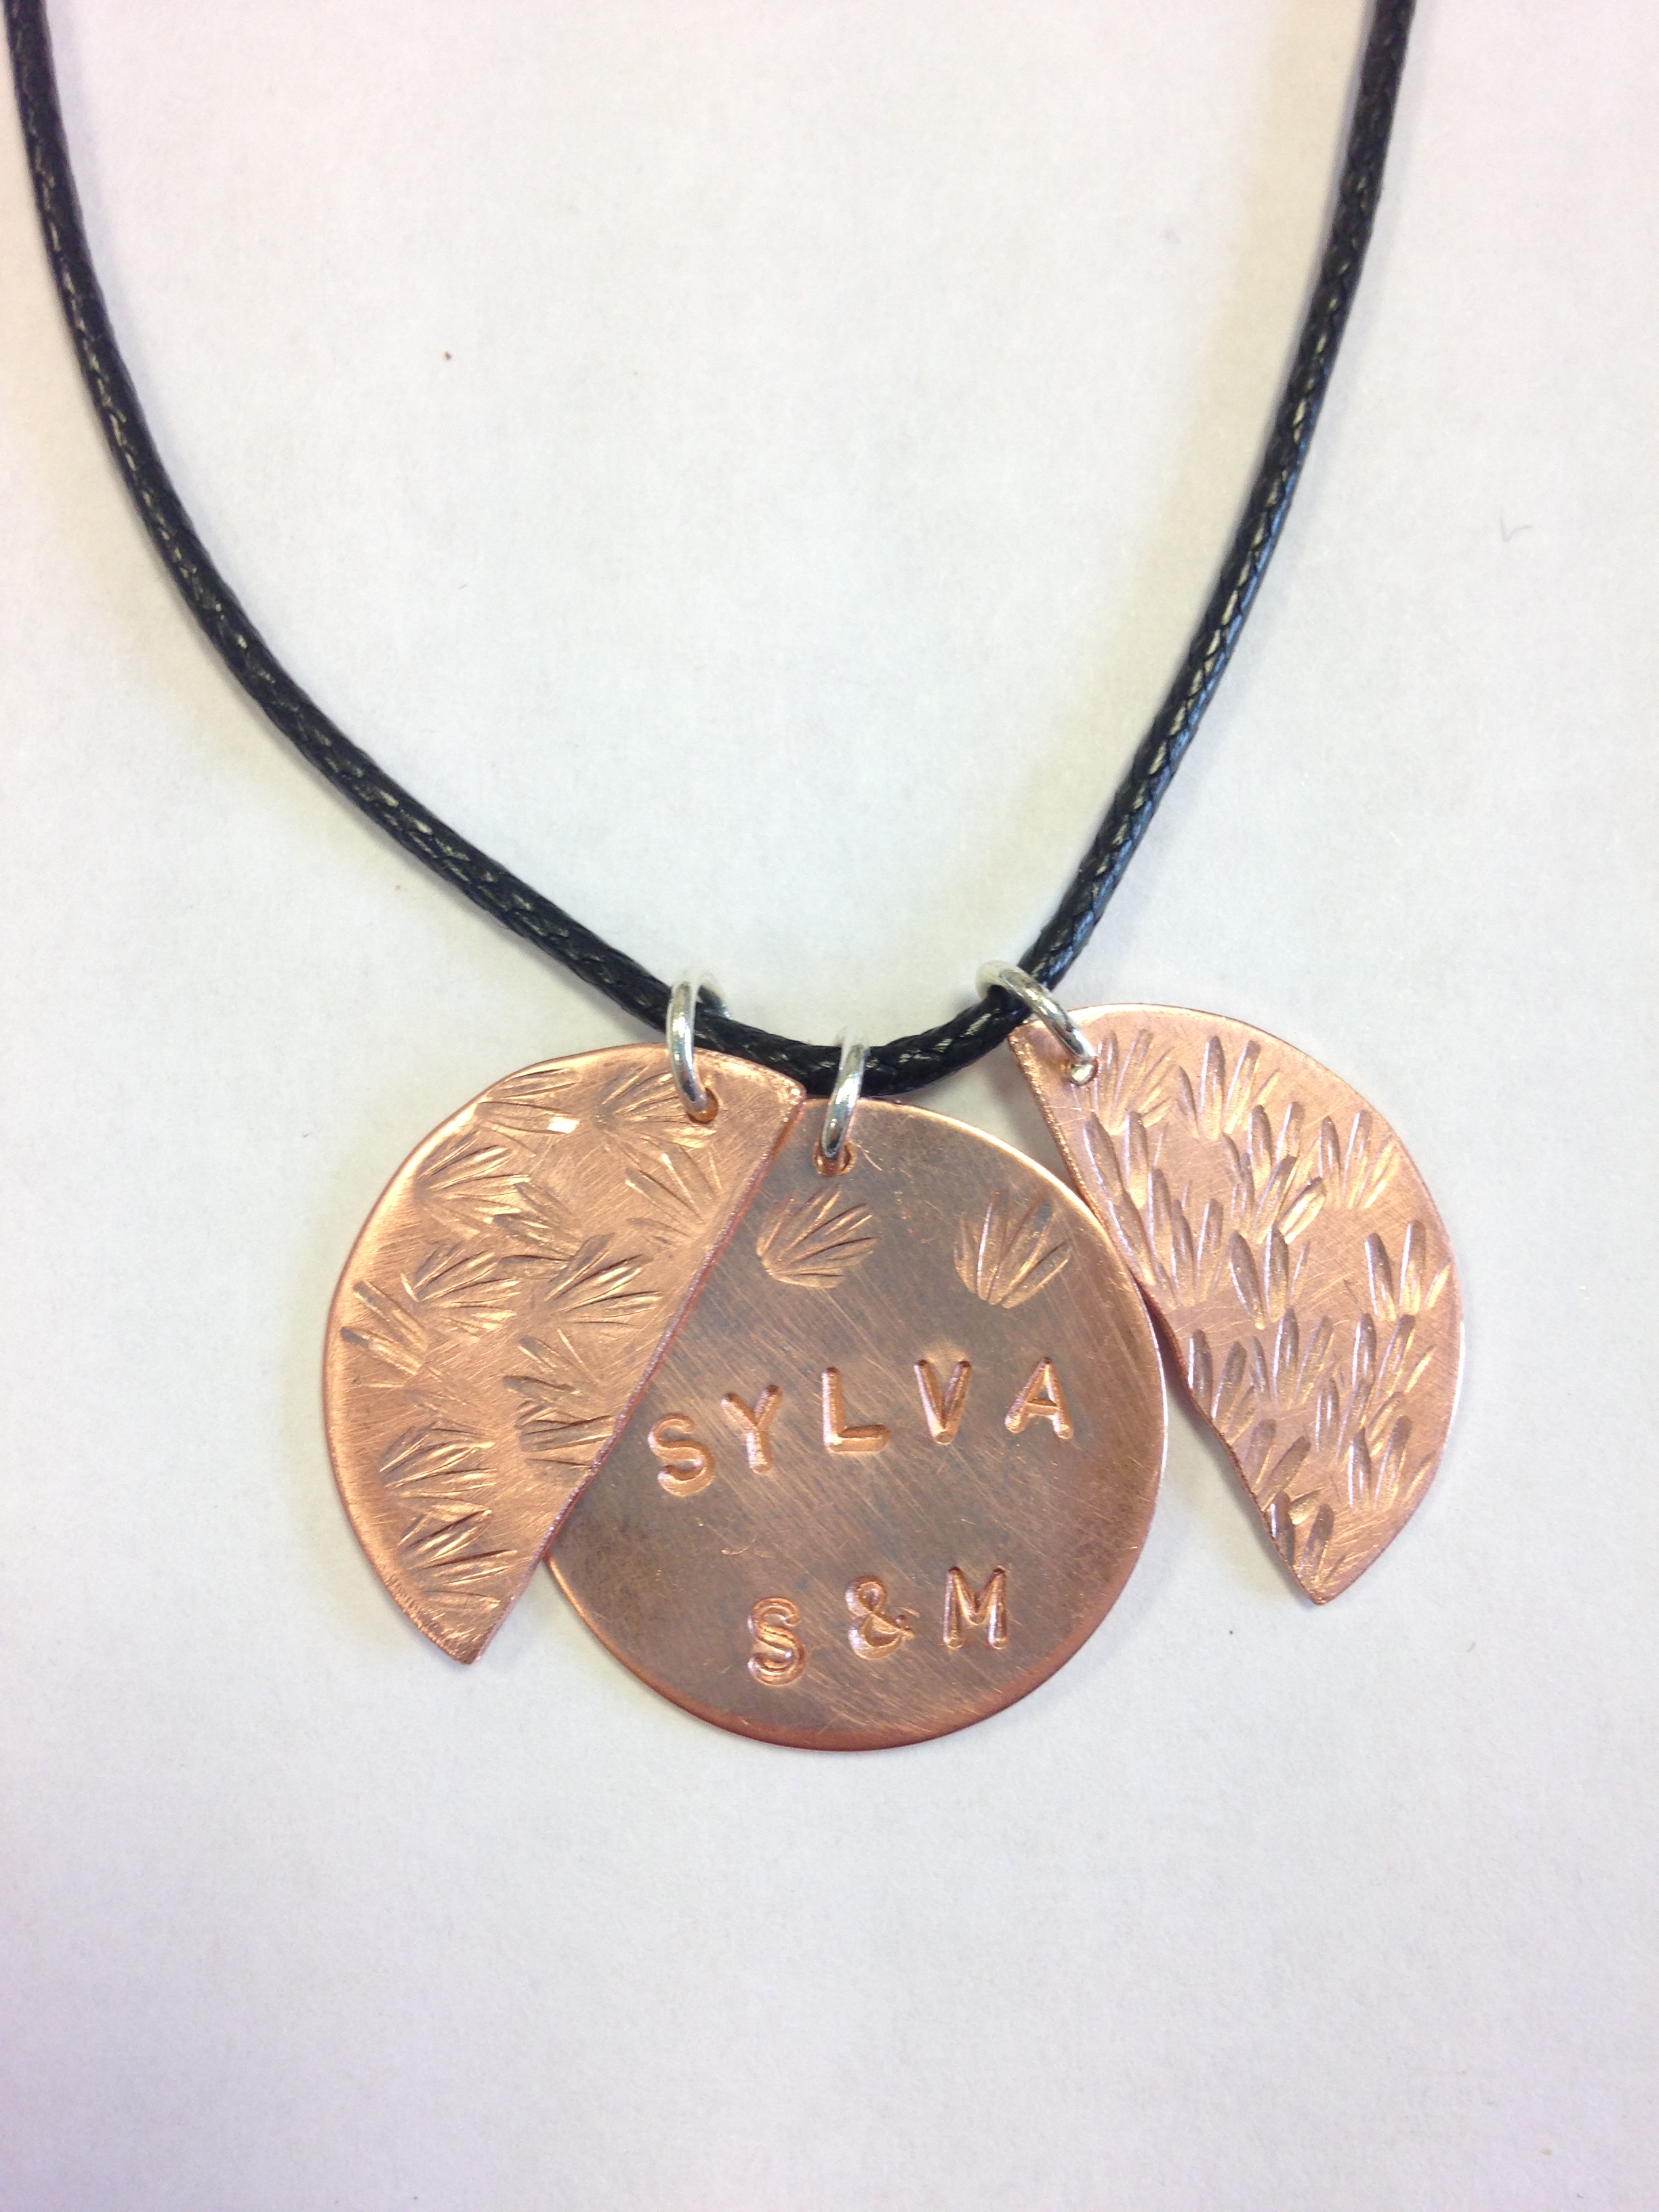 A necklace on whose copper disc a woman stamped her name.